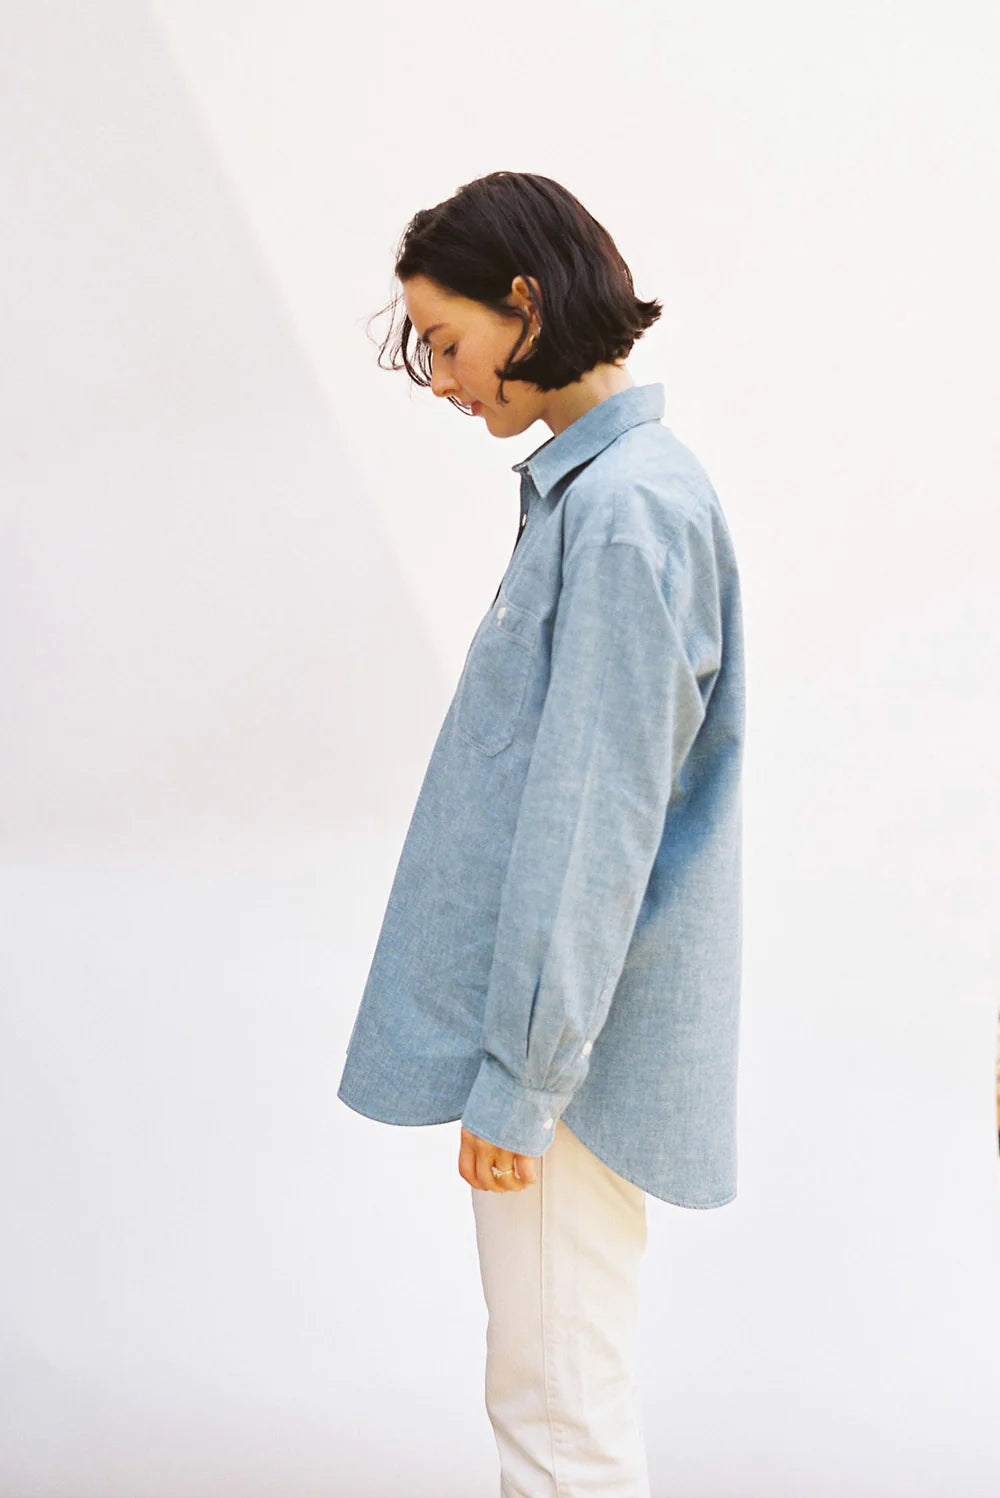 Gallery images of the Women's Chambray Workshirt